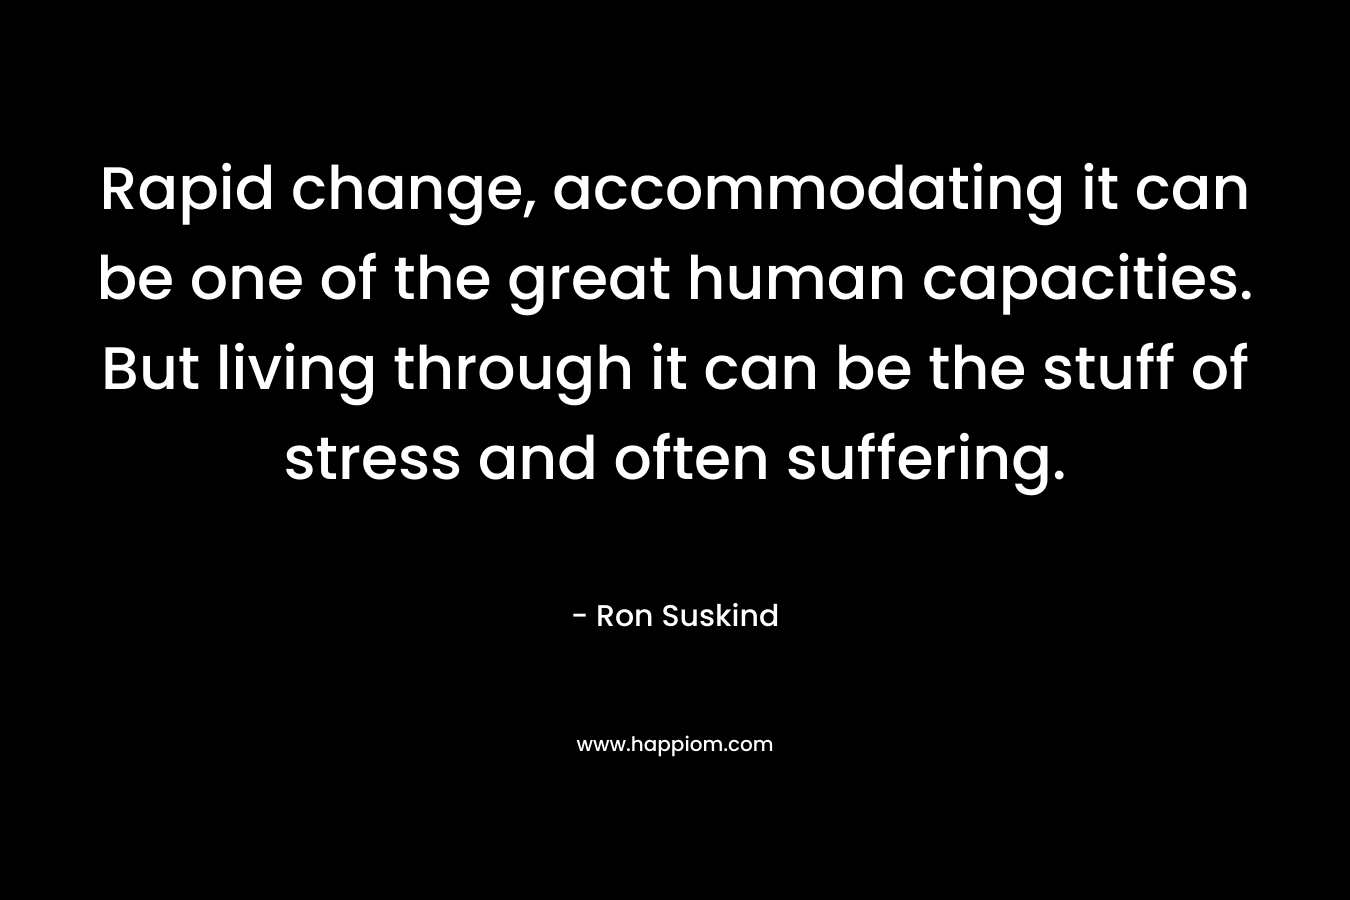 Rapid change, accommodating it can be one of the great human capacities. But living through it can be the stuff of stress and often suffering.